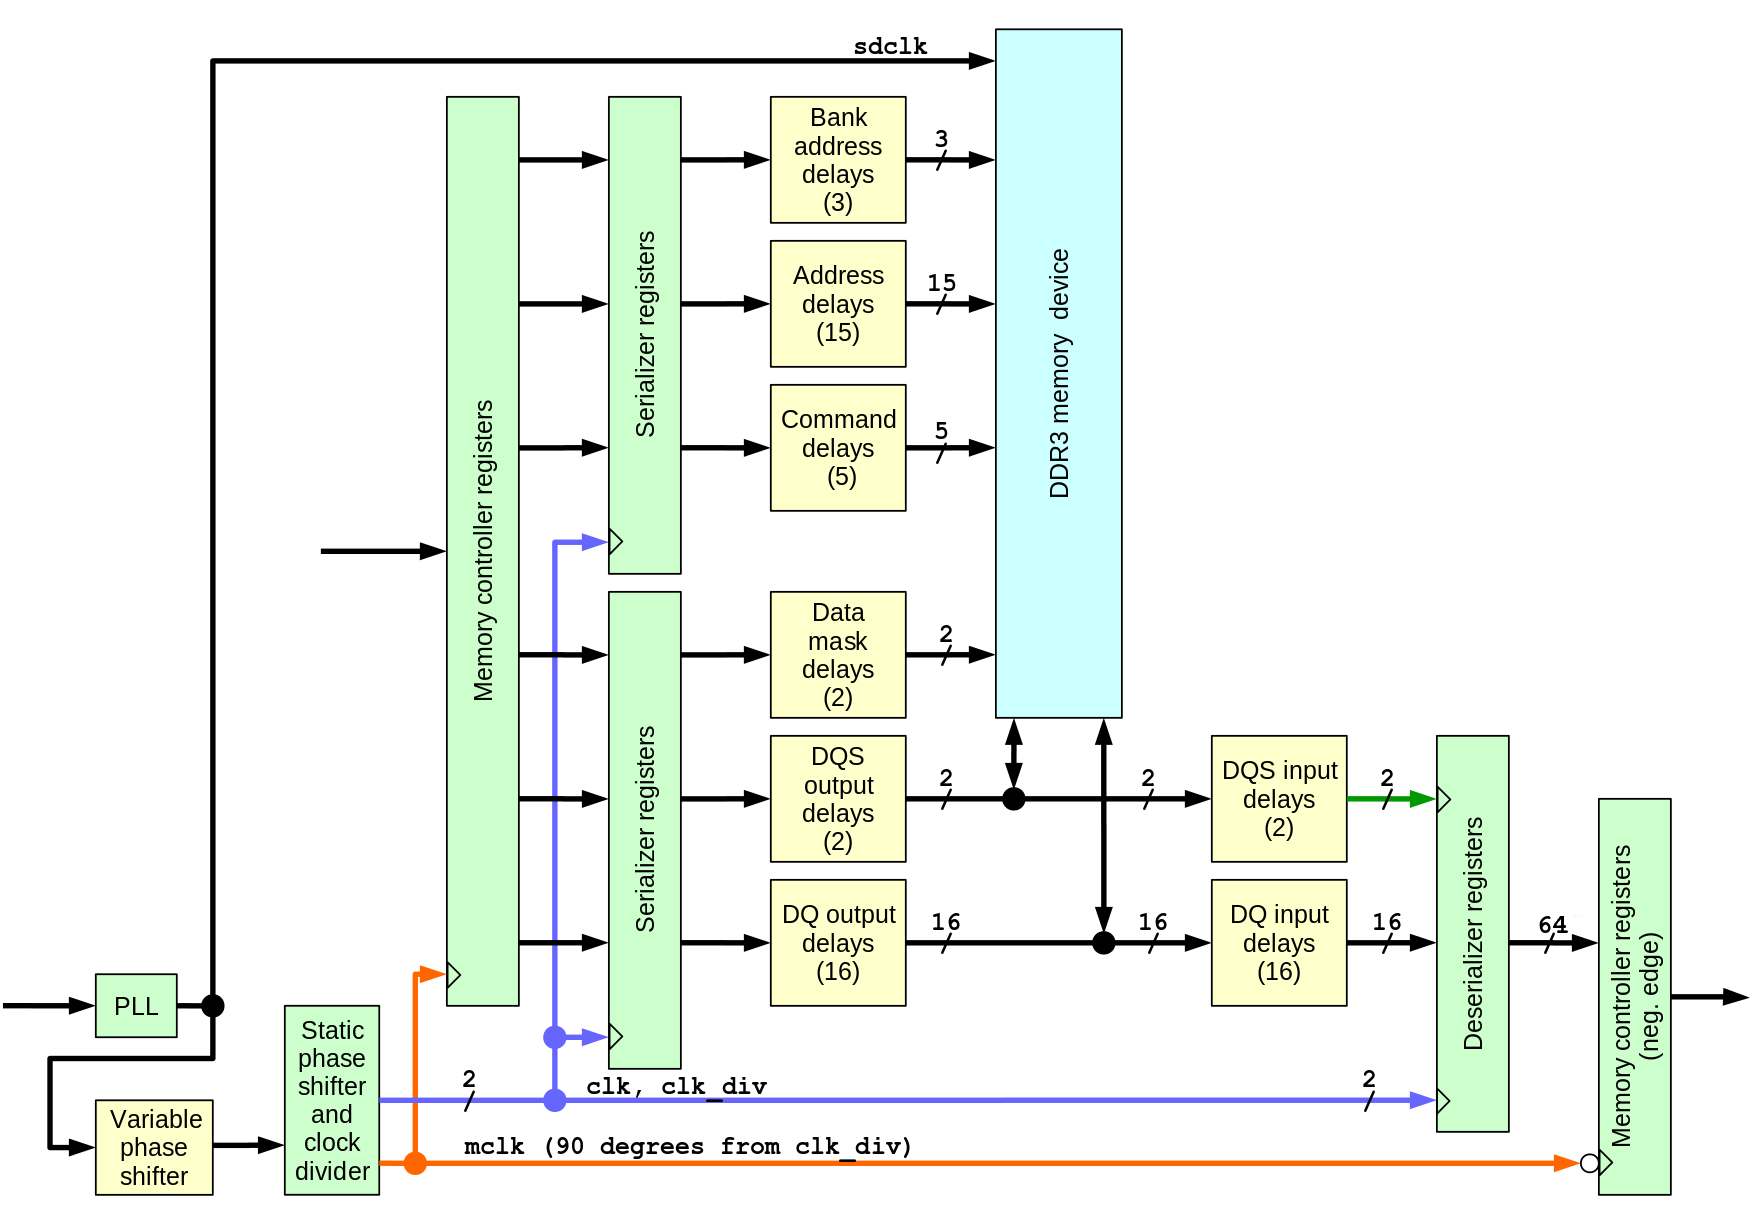 Fig.1 Memory interface diagram showing signal paths and delays